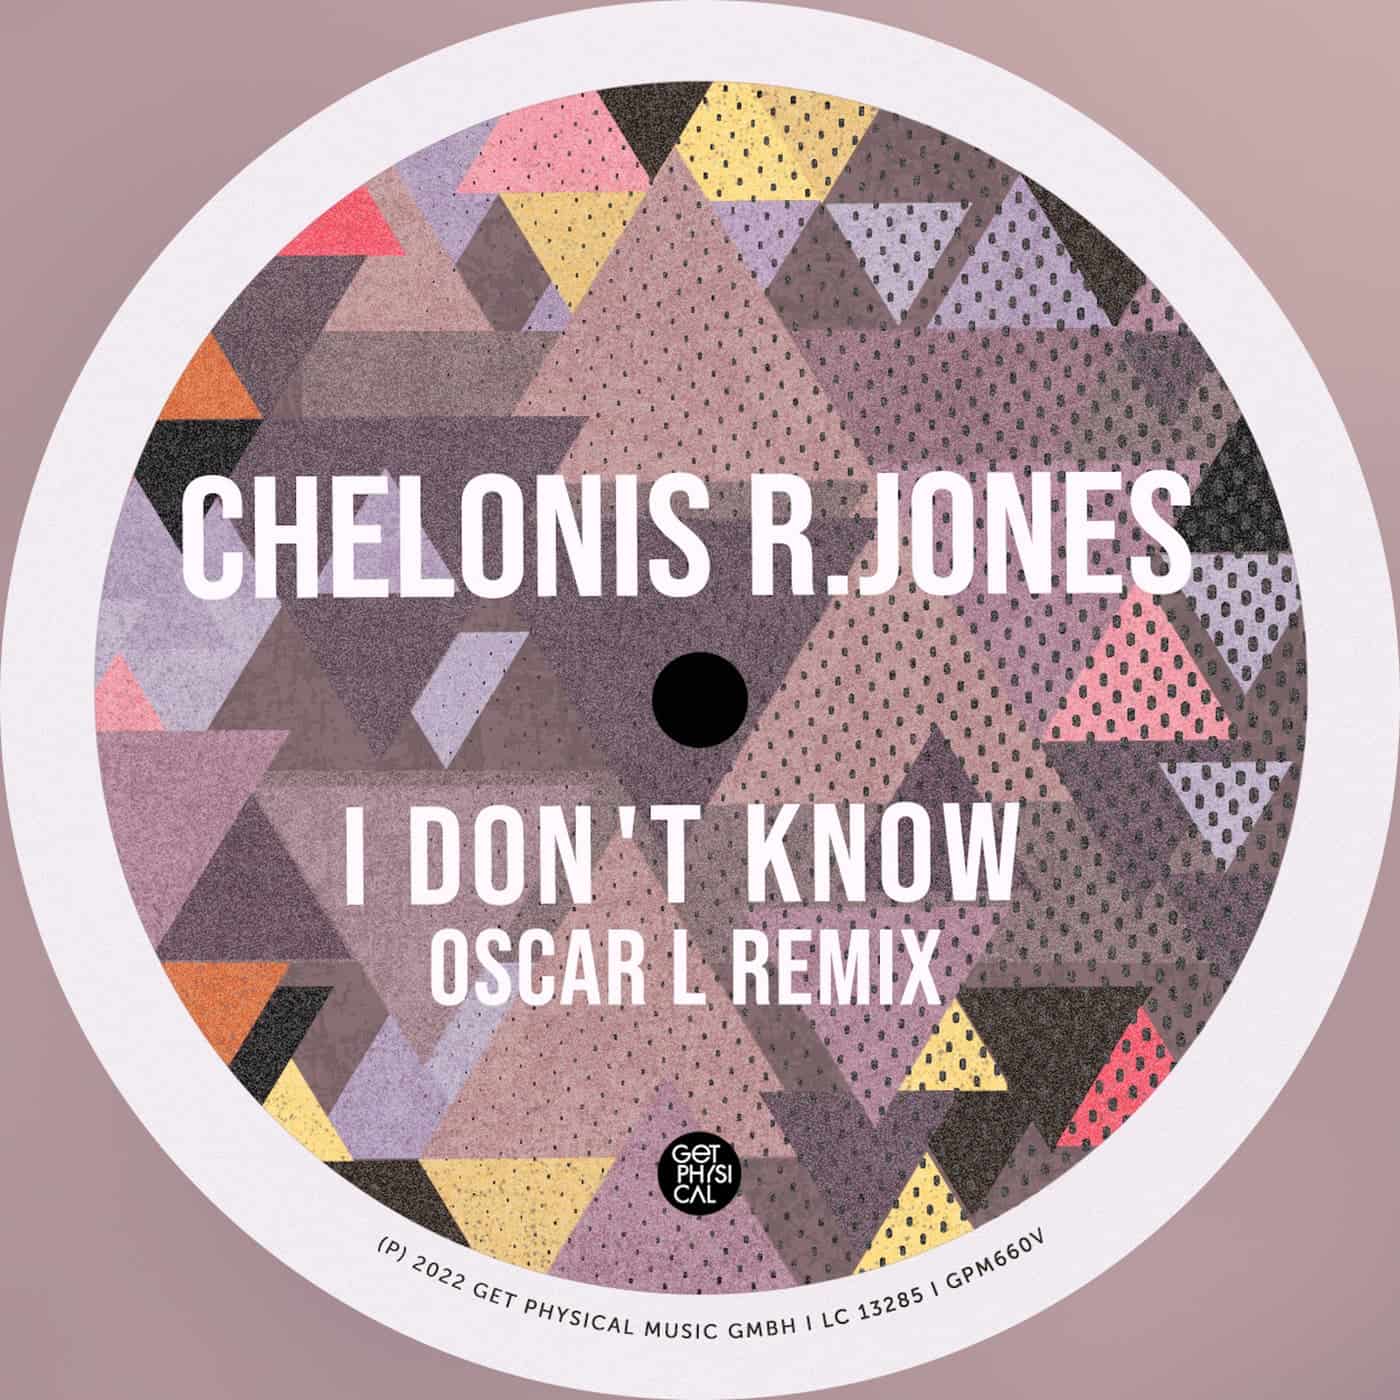 image cover: Chelonis R. Jones - I Don't Know (Oscar L Remix) / GPM660